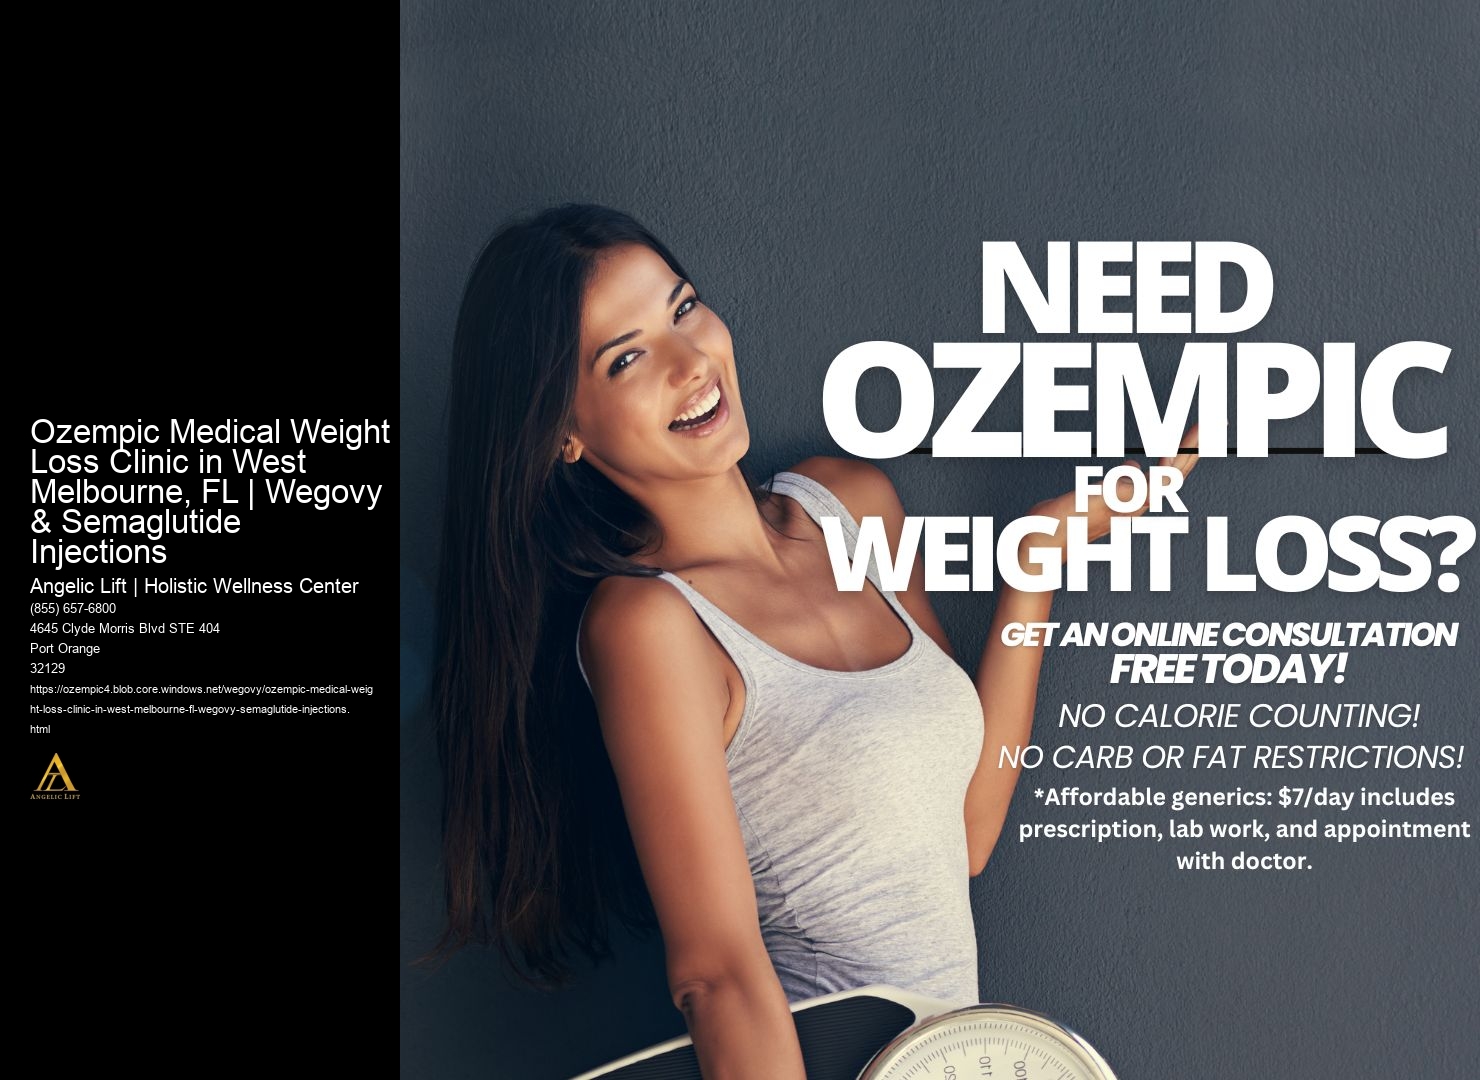 Ozempic Medical Weight Loss Clinic in West Melbourne, FL | Wegovy & Semaglutide Injections